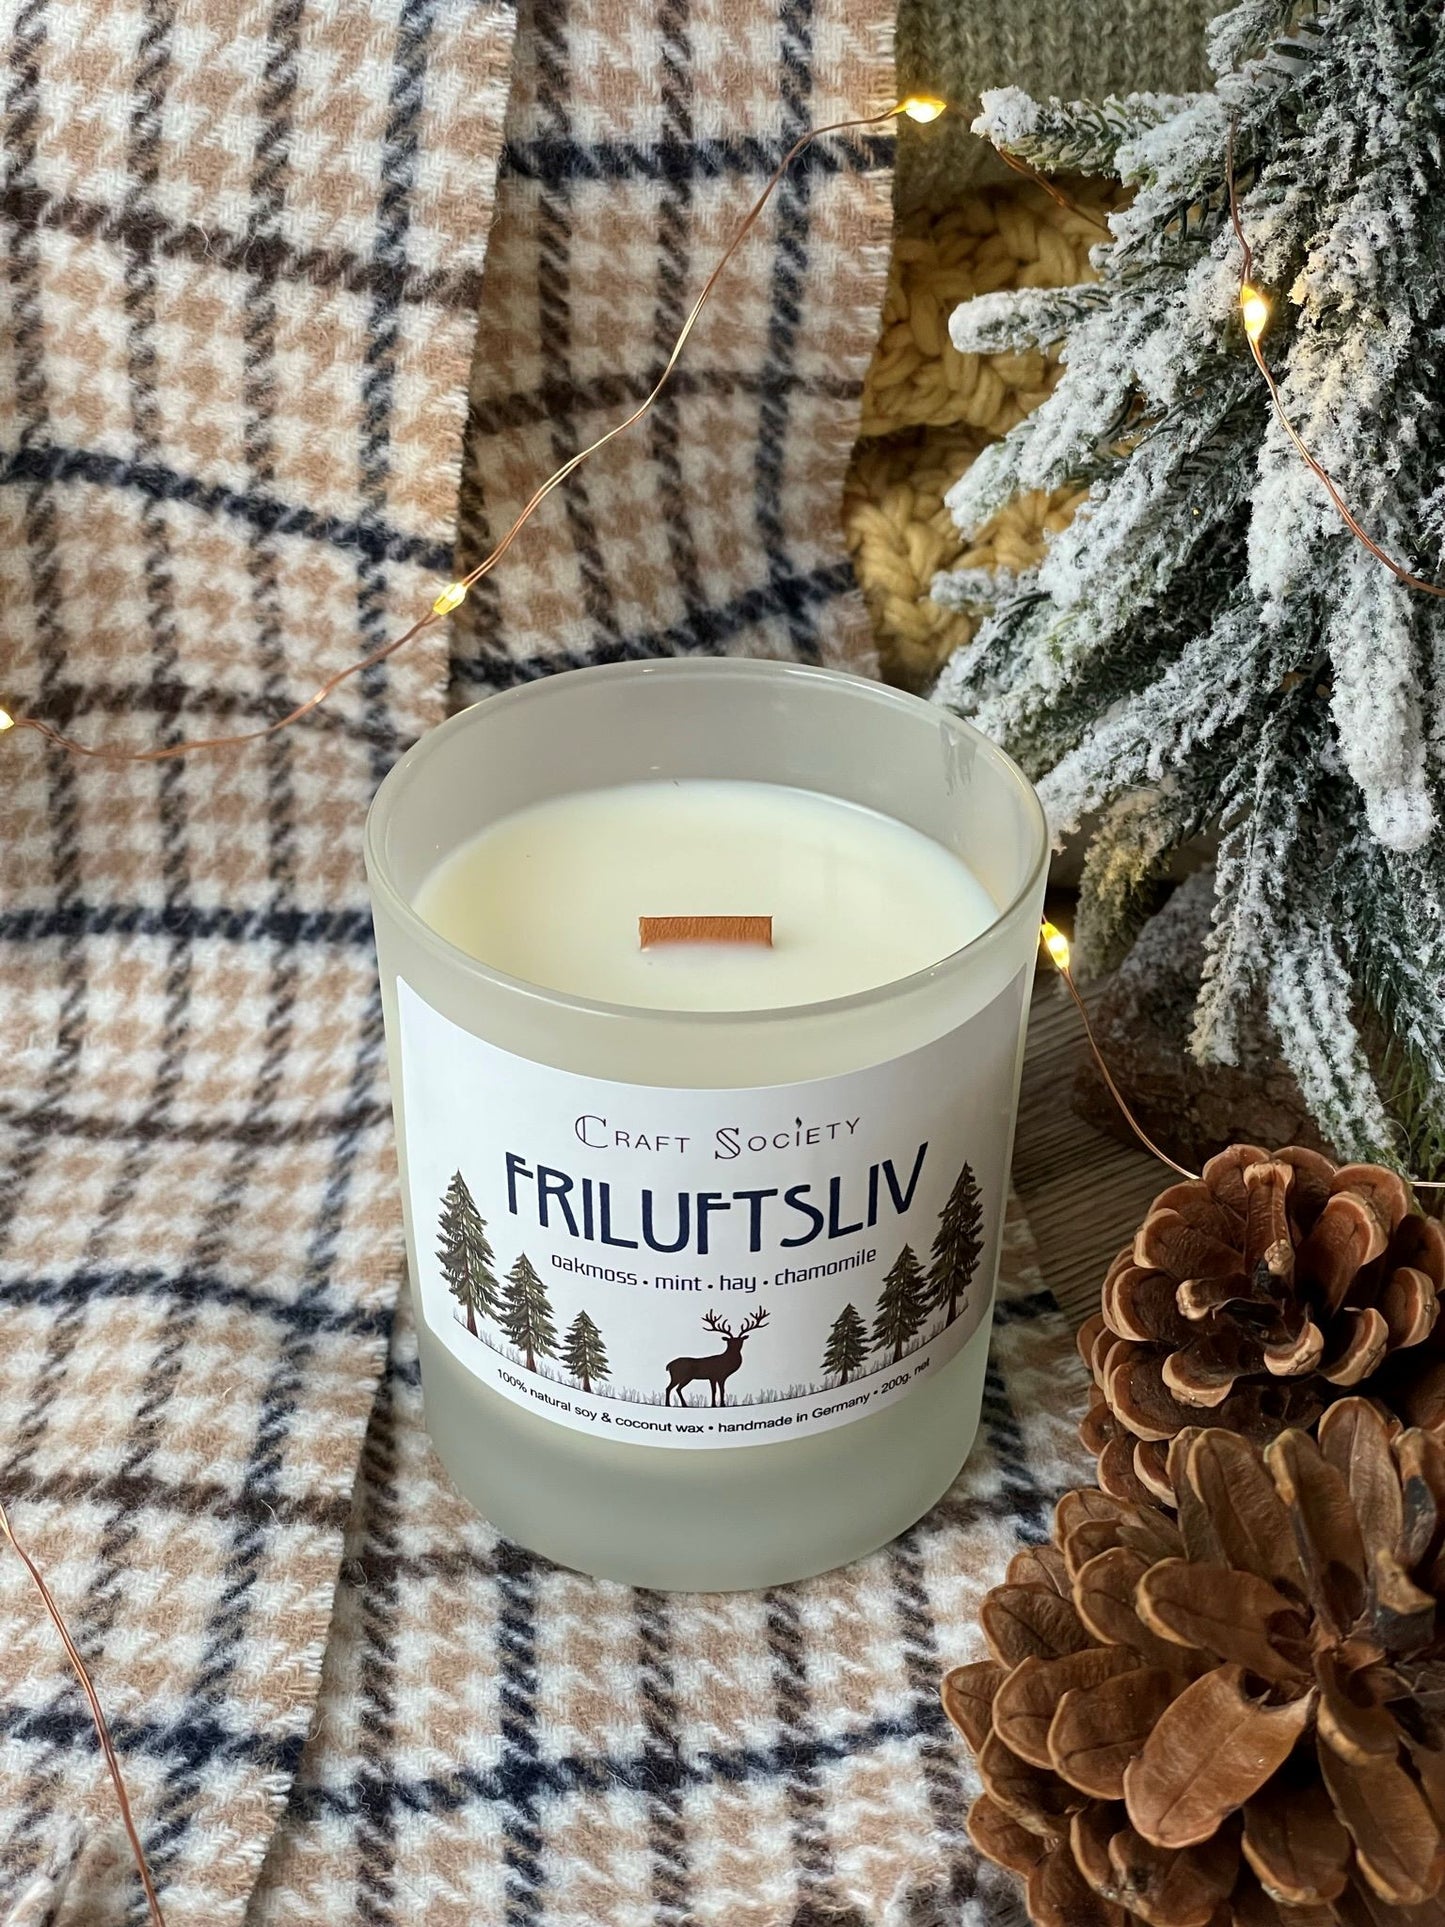 An unpacked deluxe scented candle on a decorated background